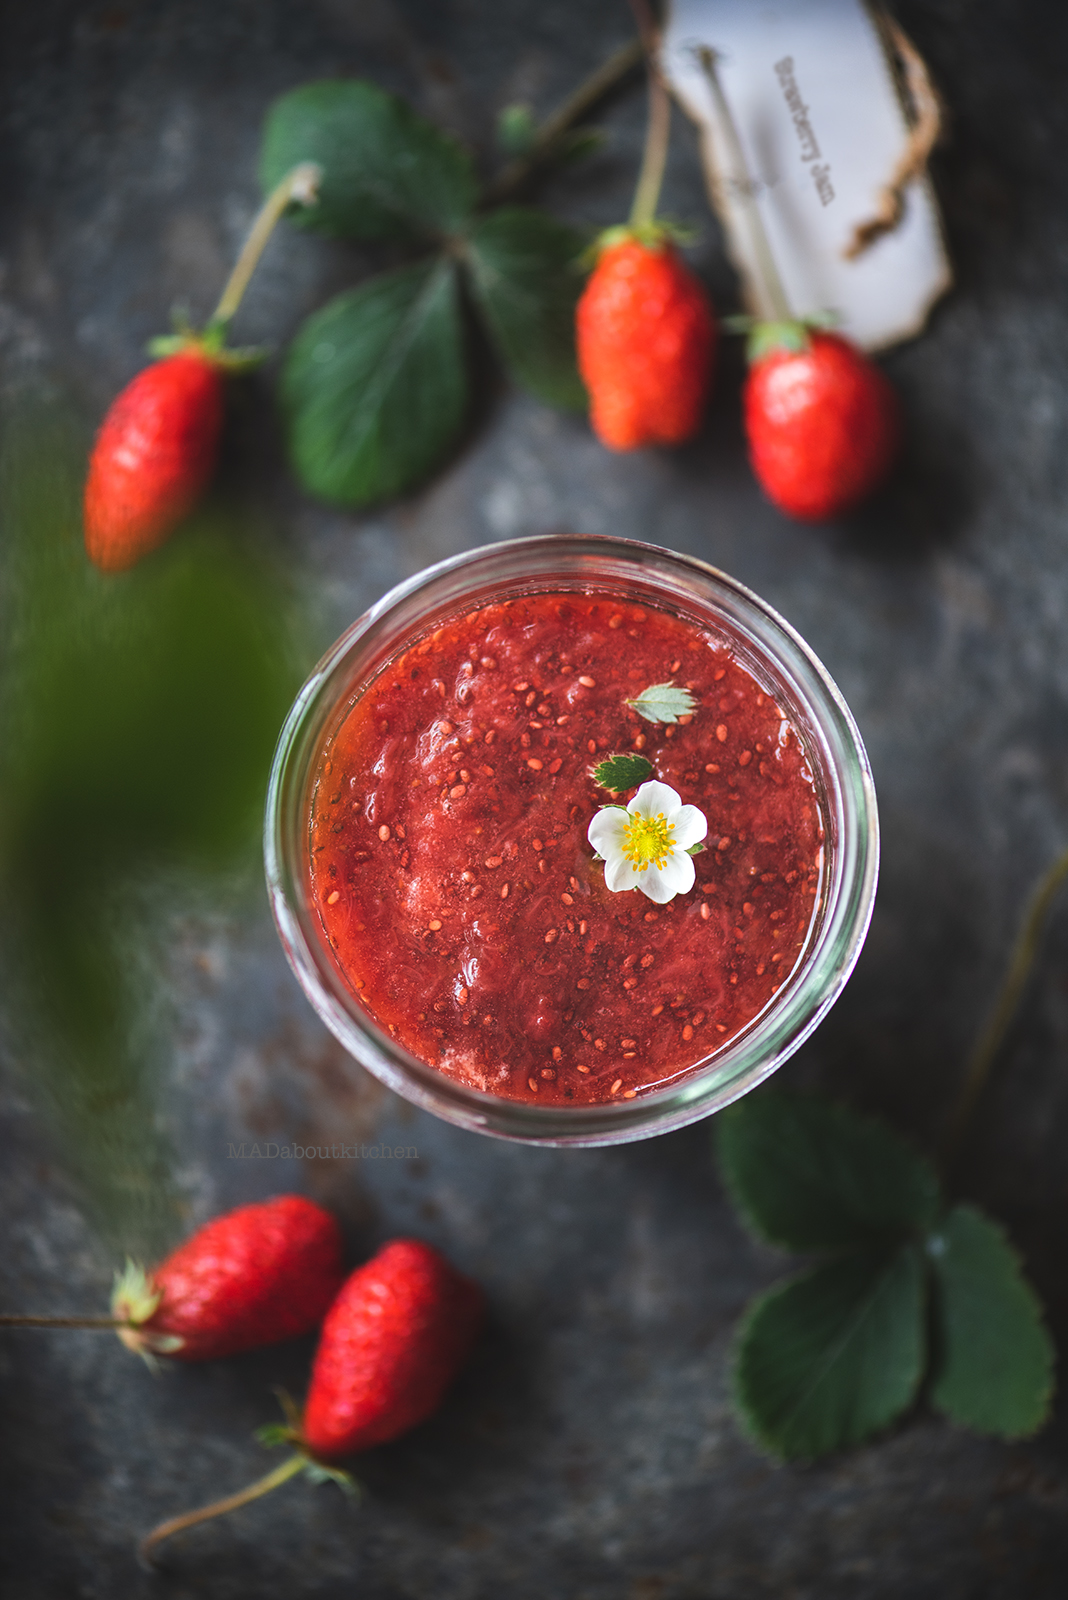 Homemade Strawberry Jam with chia seeds which is thick, sticky and glossy which is super simple to make and can be used to spread on bread or on pancakes.